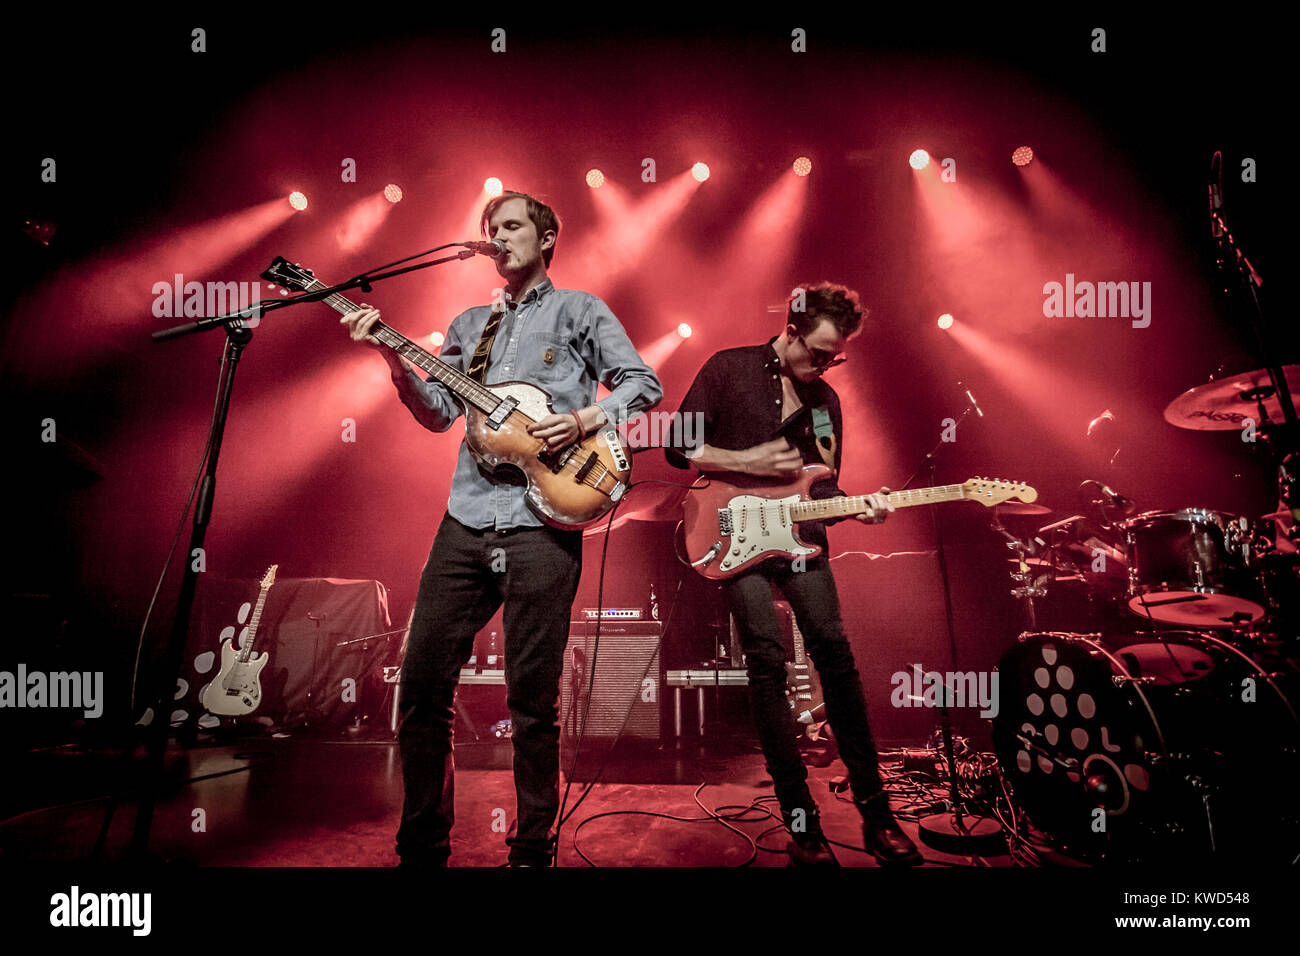 The German indie-rock and funk band Pool consists of Nils Hansen, Daniel Husten and David Stolzenberg. The trio here performs a live concert at Vega in Copenhagen as a warm up concert for The 1975. Denmark, 15/10 2014. Stock Photo